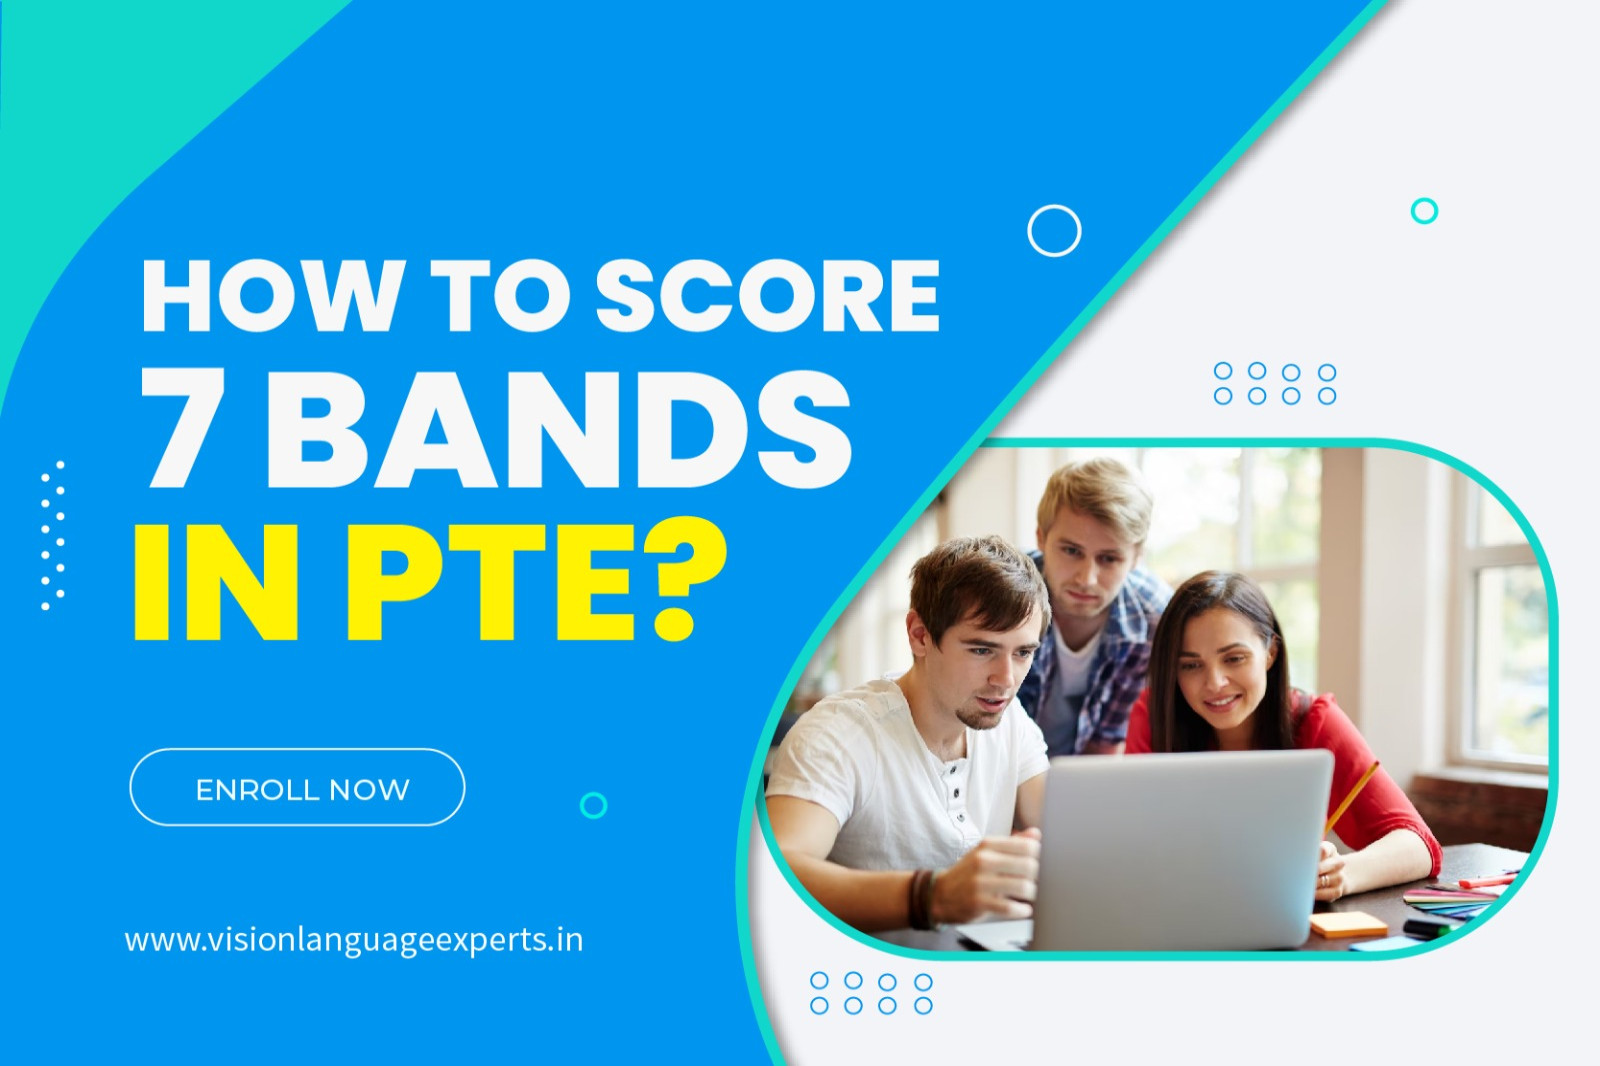 How to Score 7 Bands in PTE?